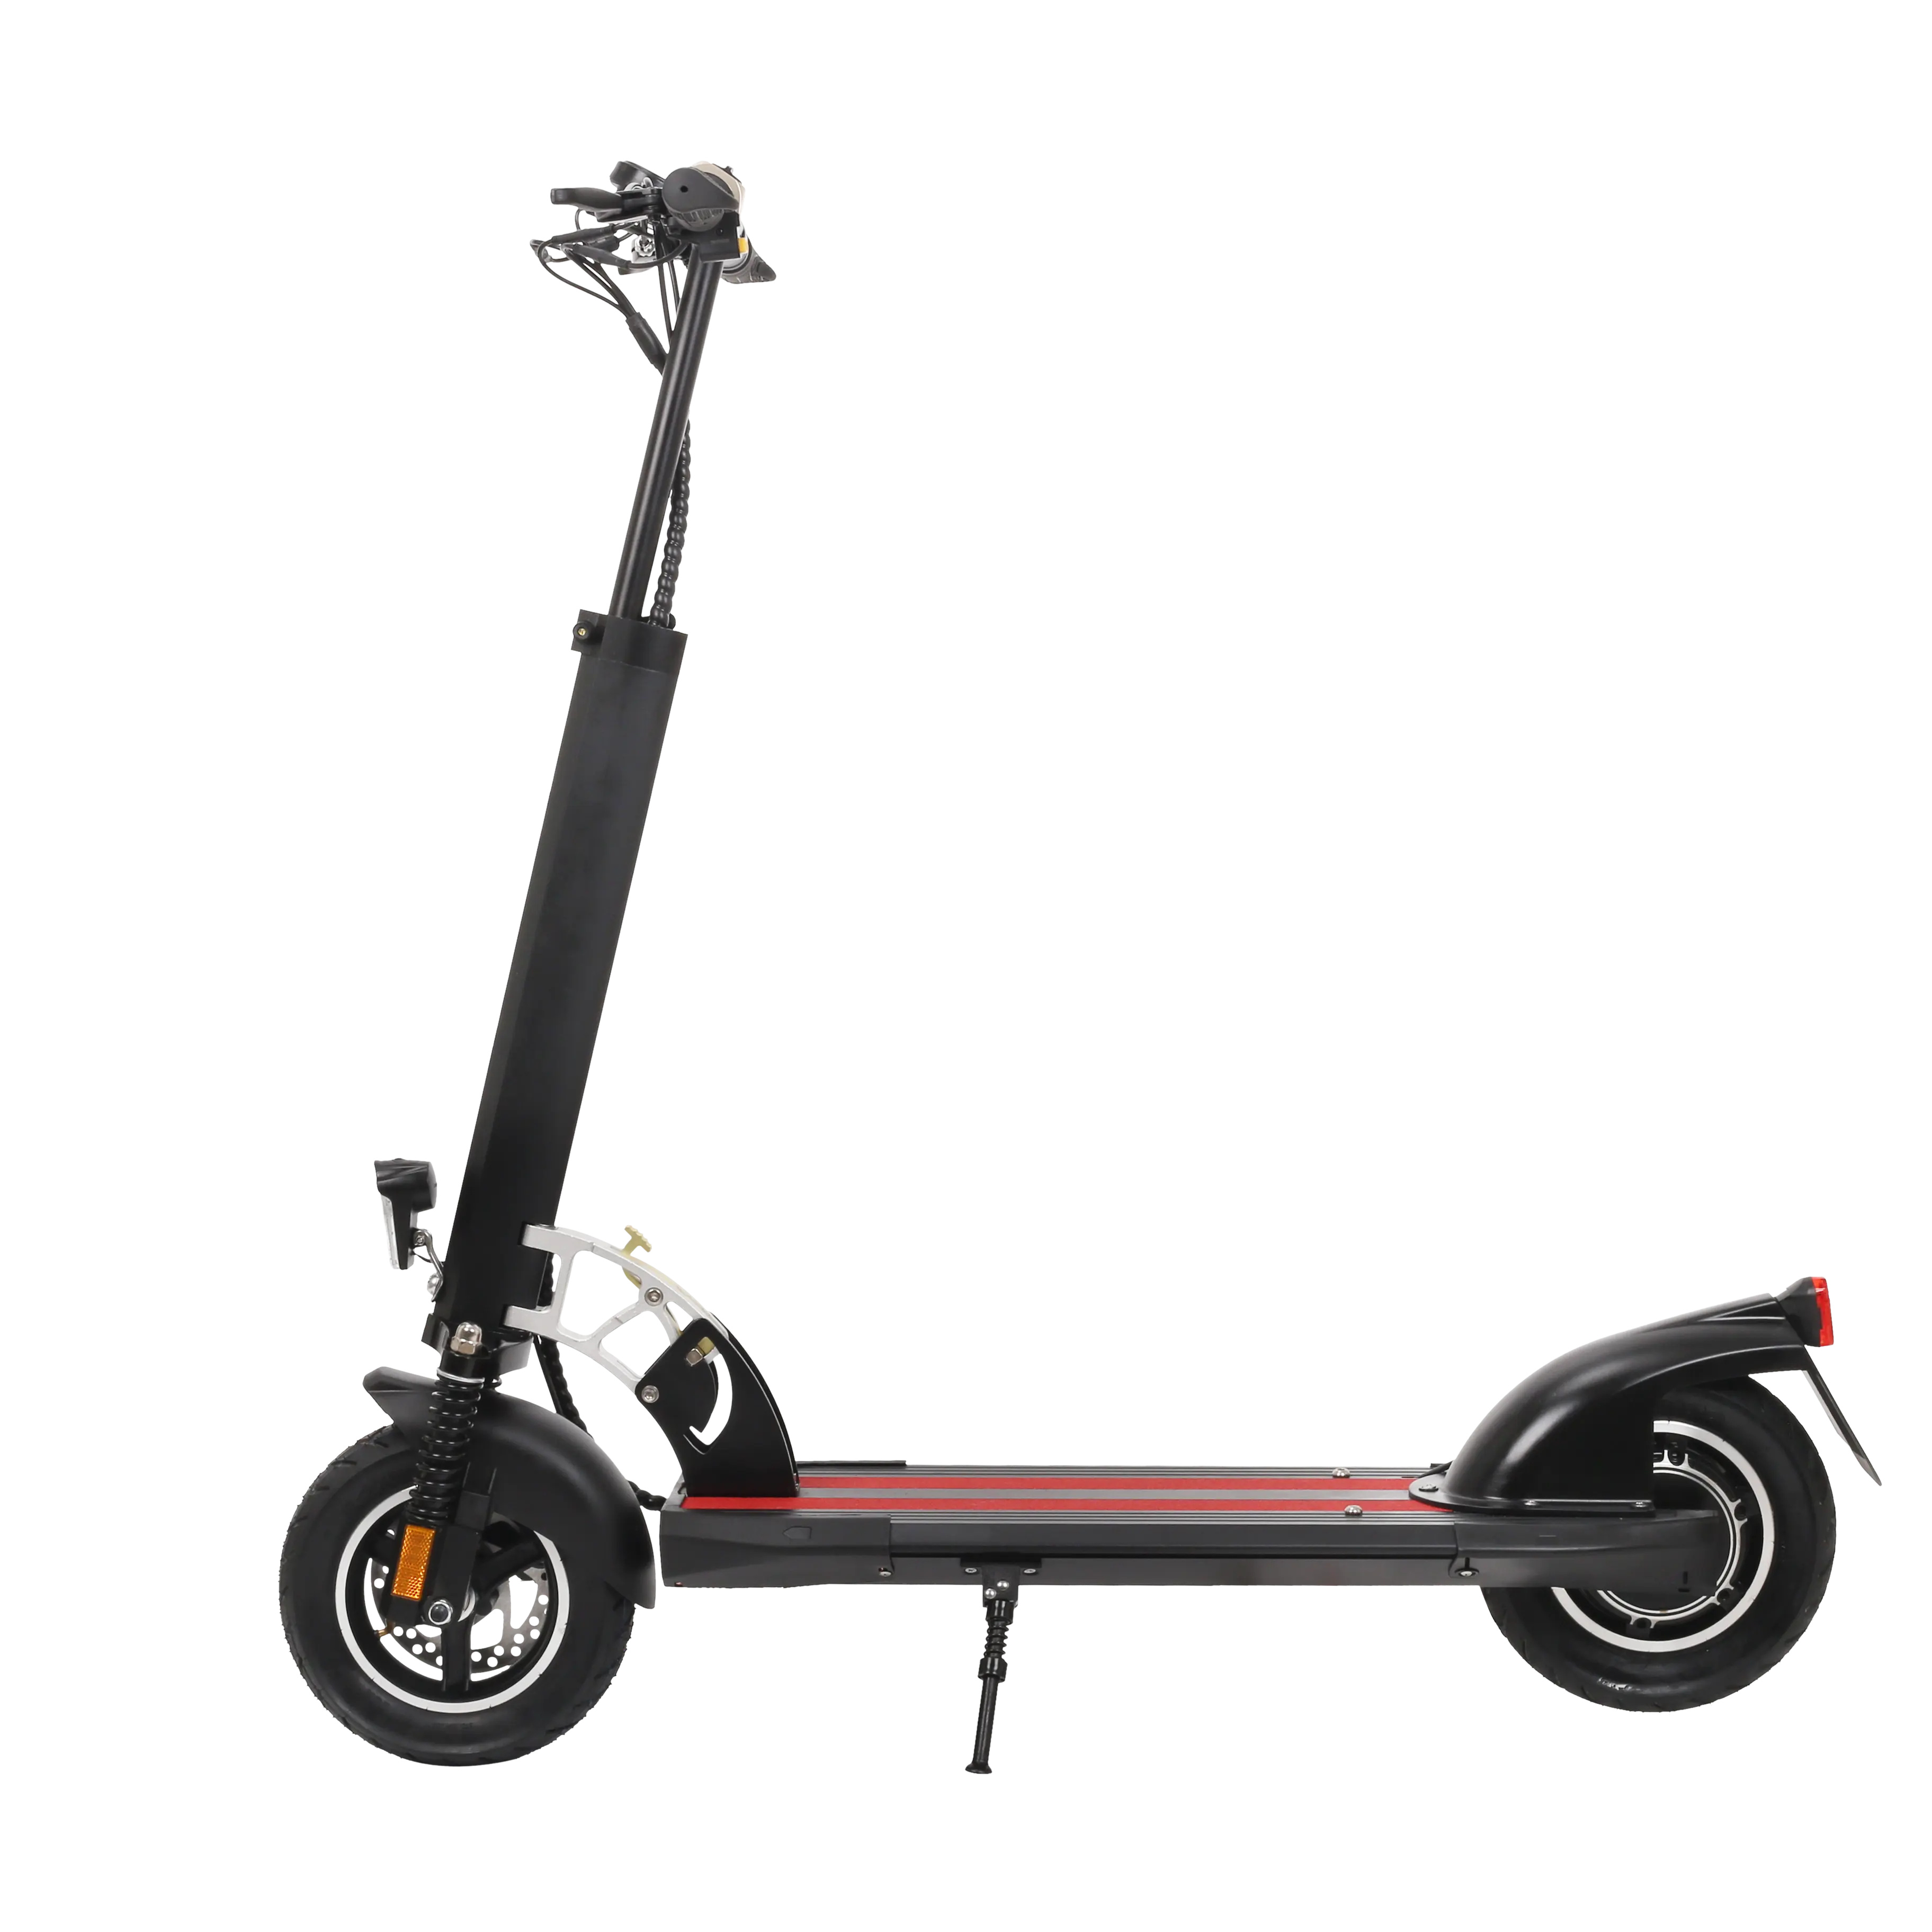 Abe Europa Hot Selling 500W 10 Inch Air Tire E Scooter